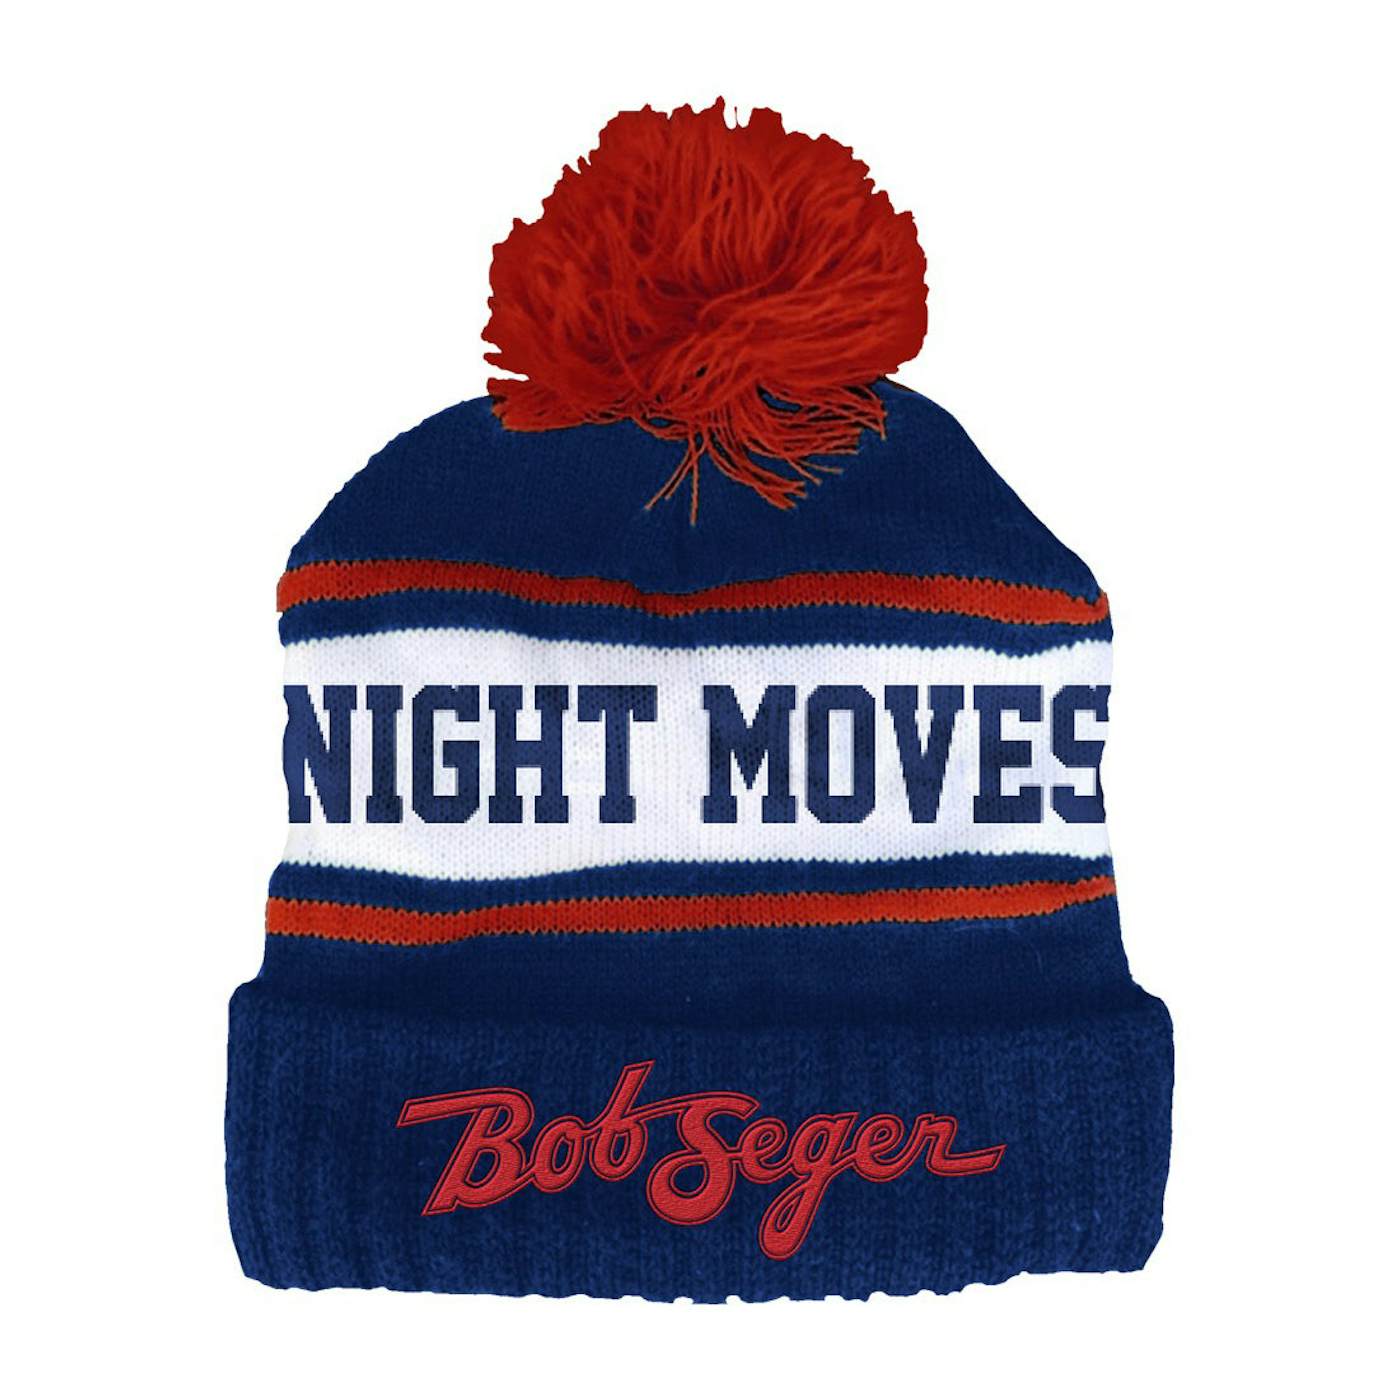 Bob Seger & The Silver Bullet Band NIGHT MOVES Beanie